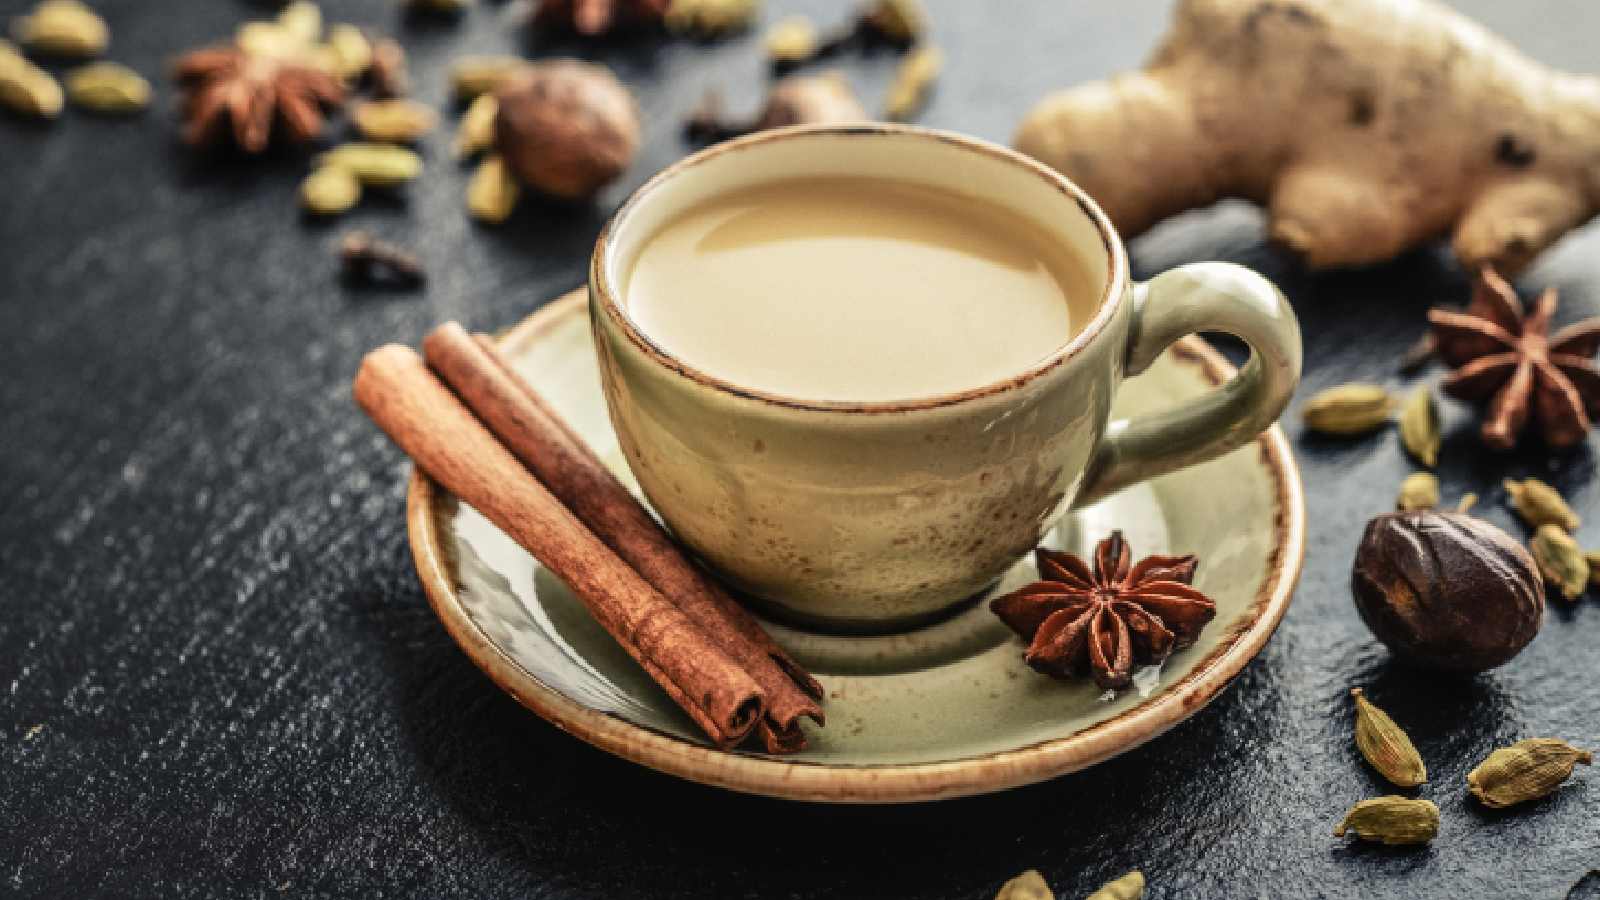 Best masala chai for better immunity and digestion